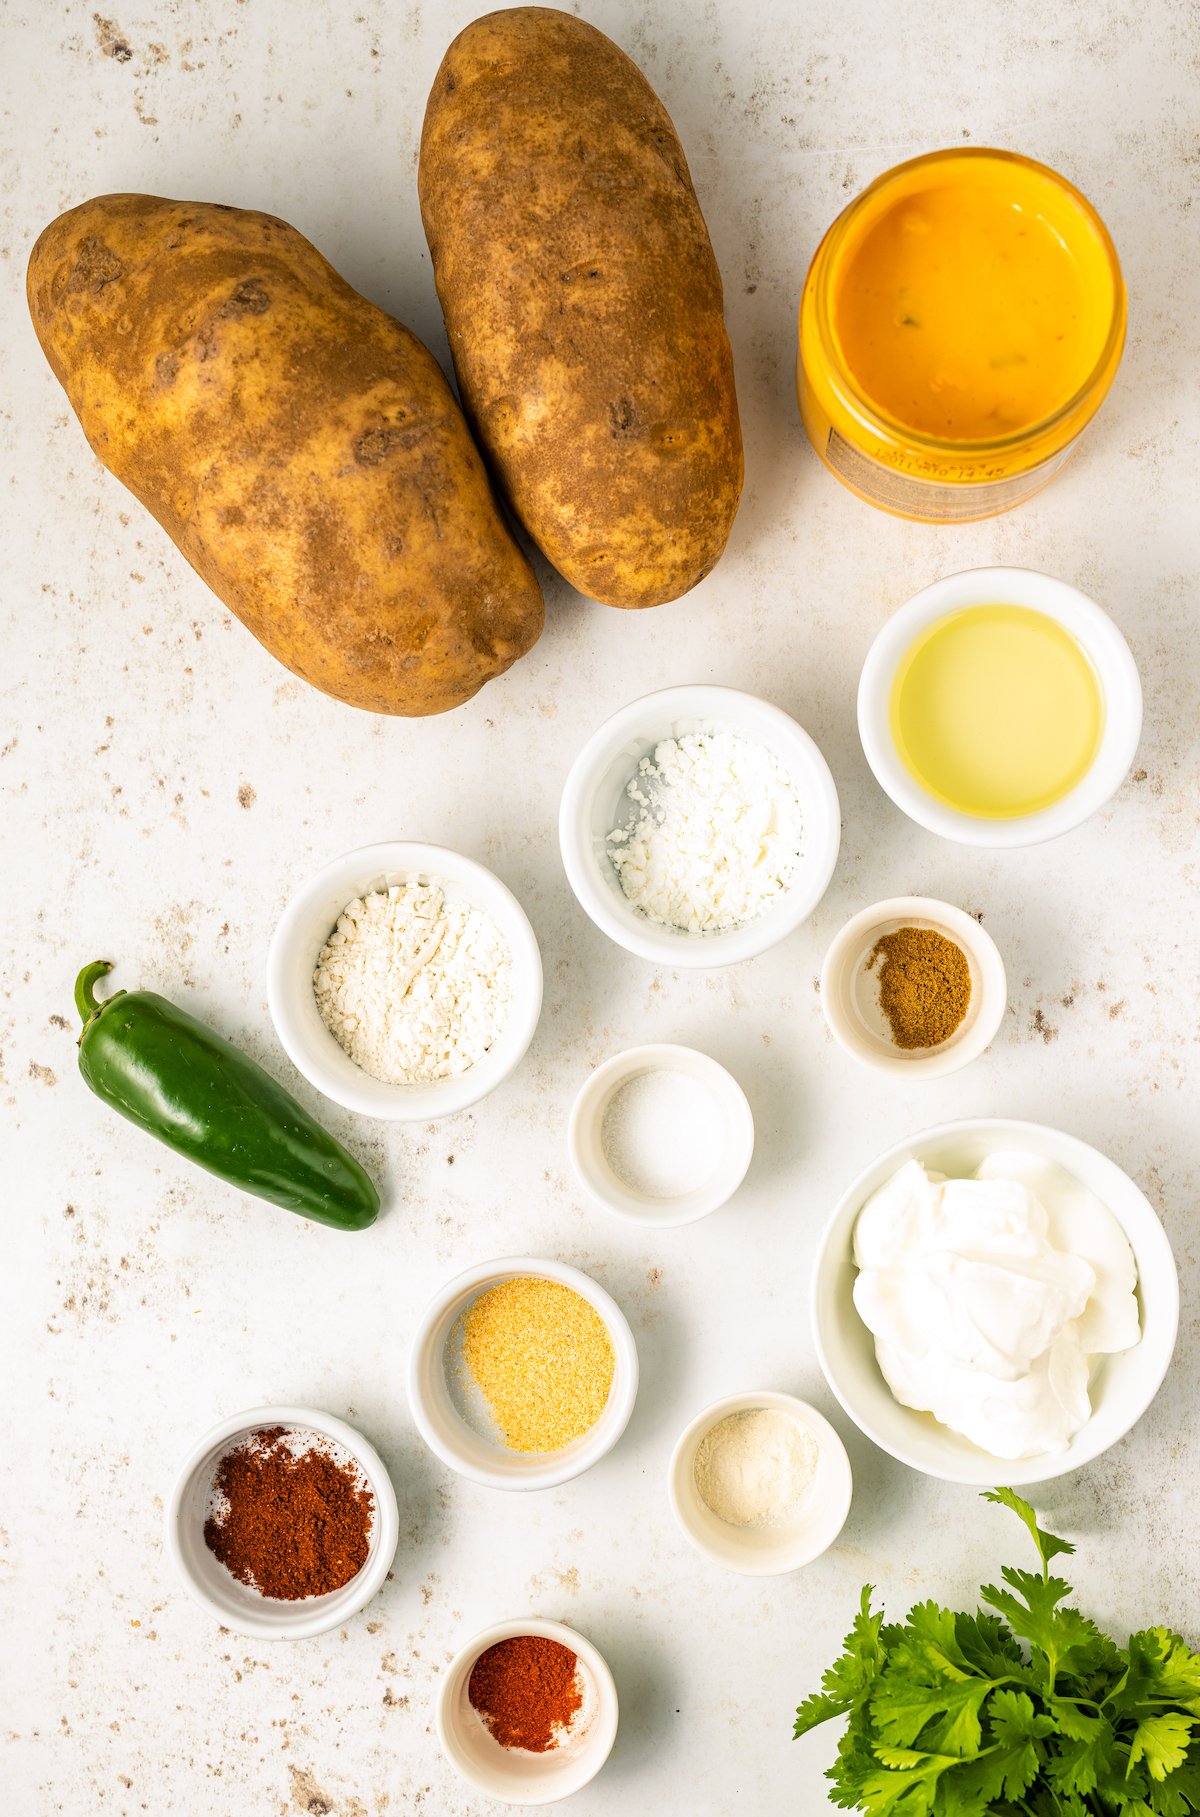 All the ingredients needed to make cheesy fiesta potatoes in prep bowls on a white background.